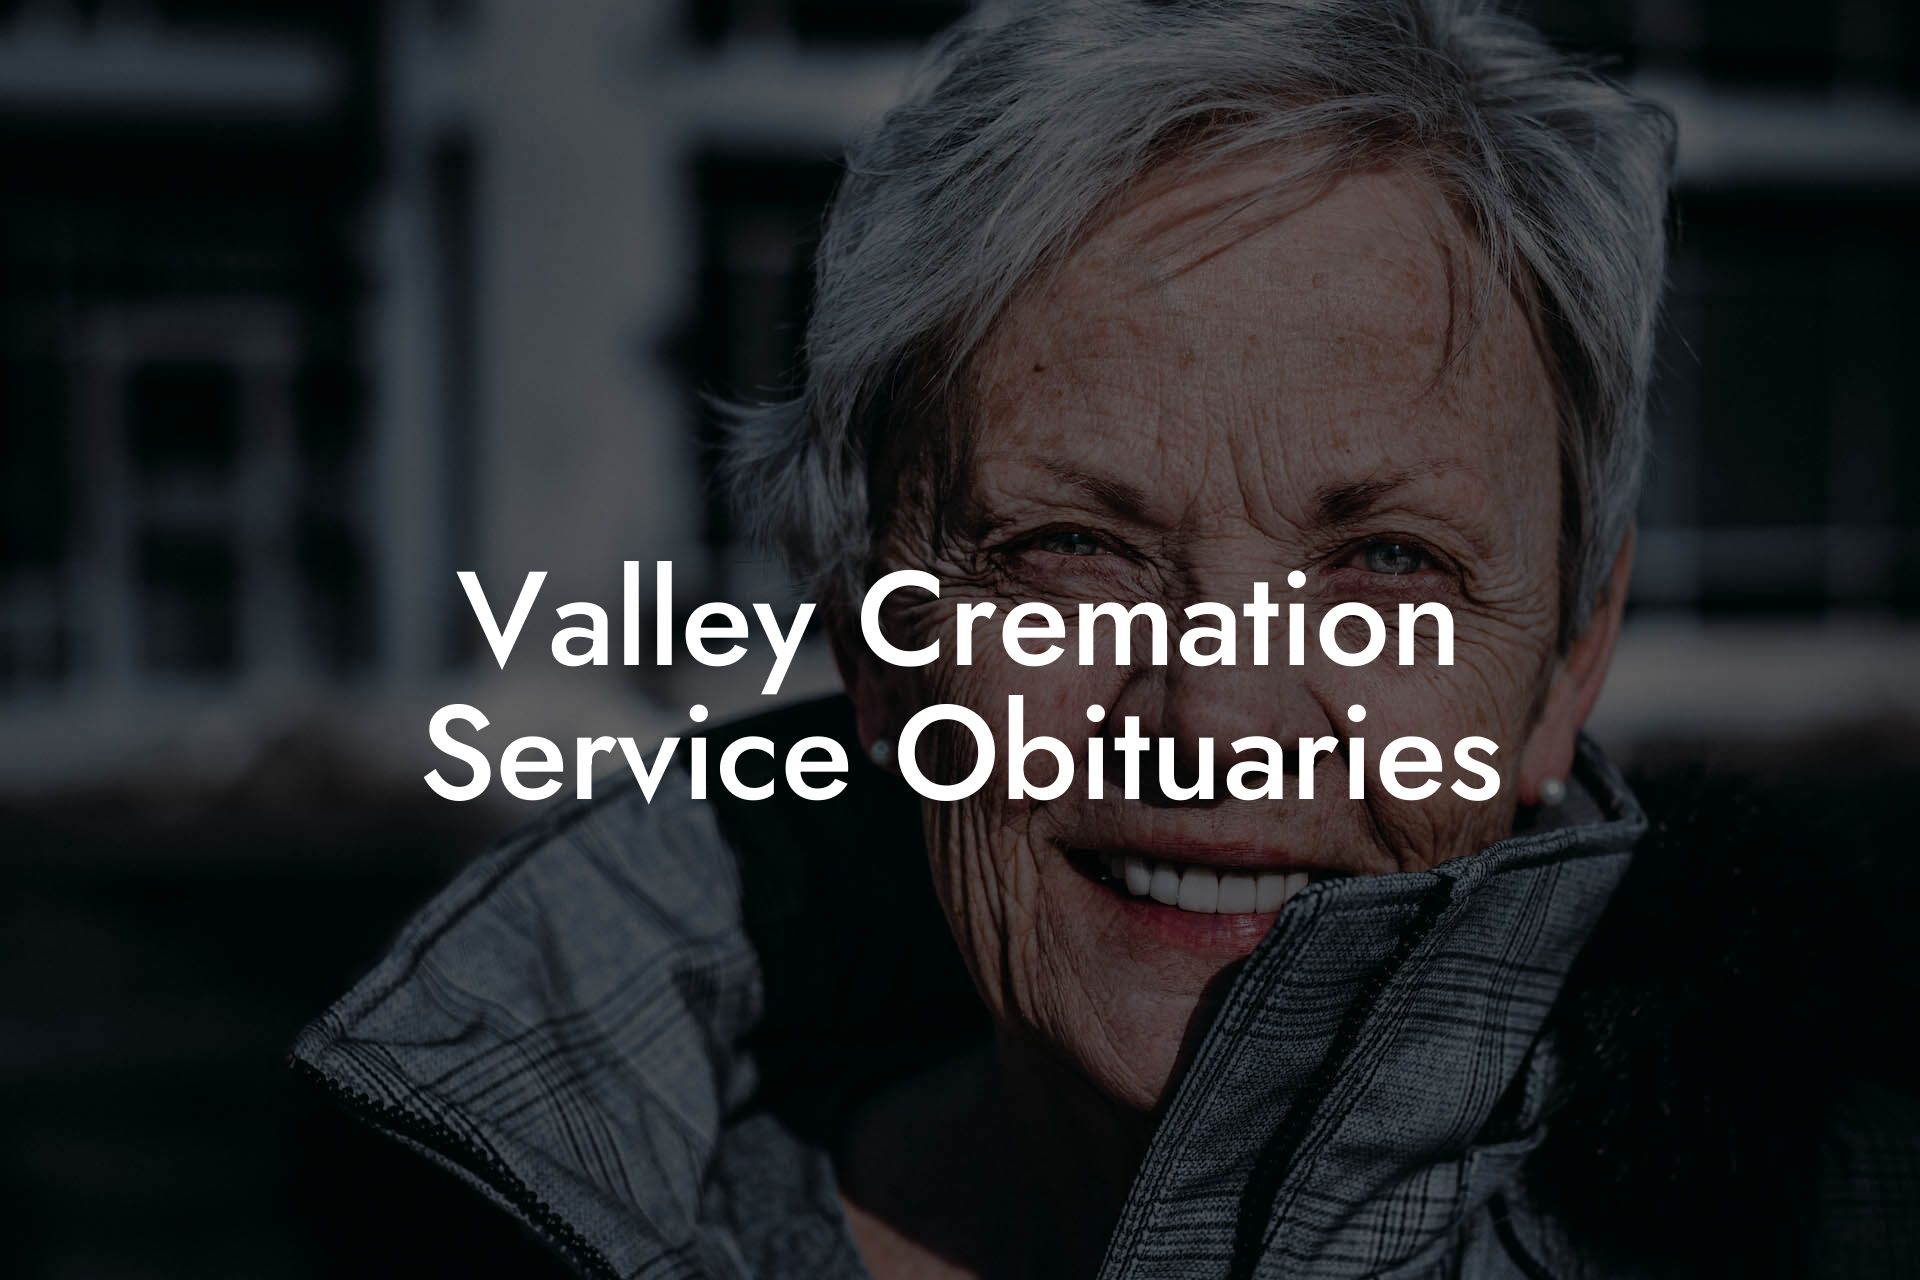 Valley Cremation Service Obituaries